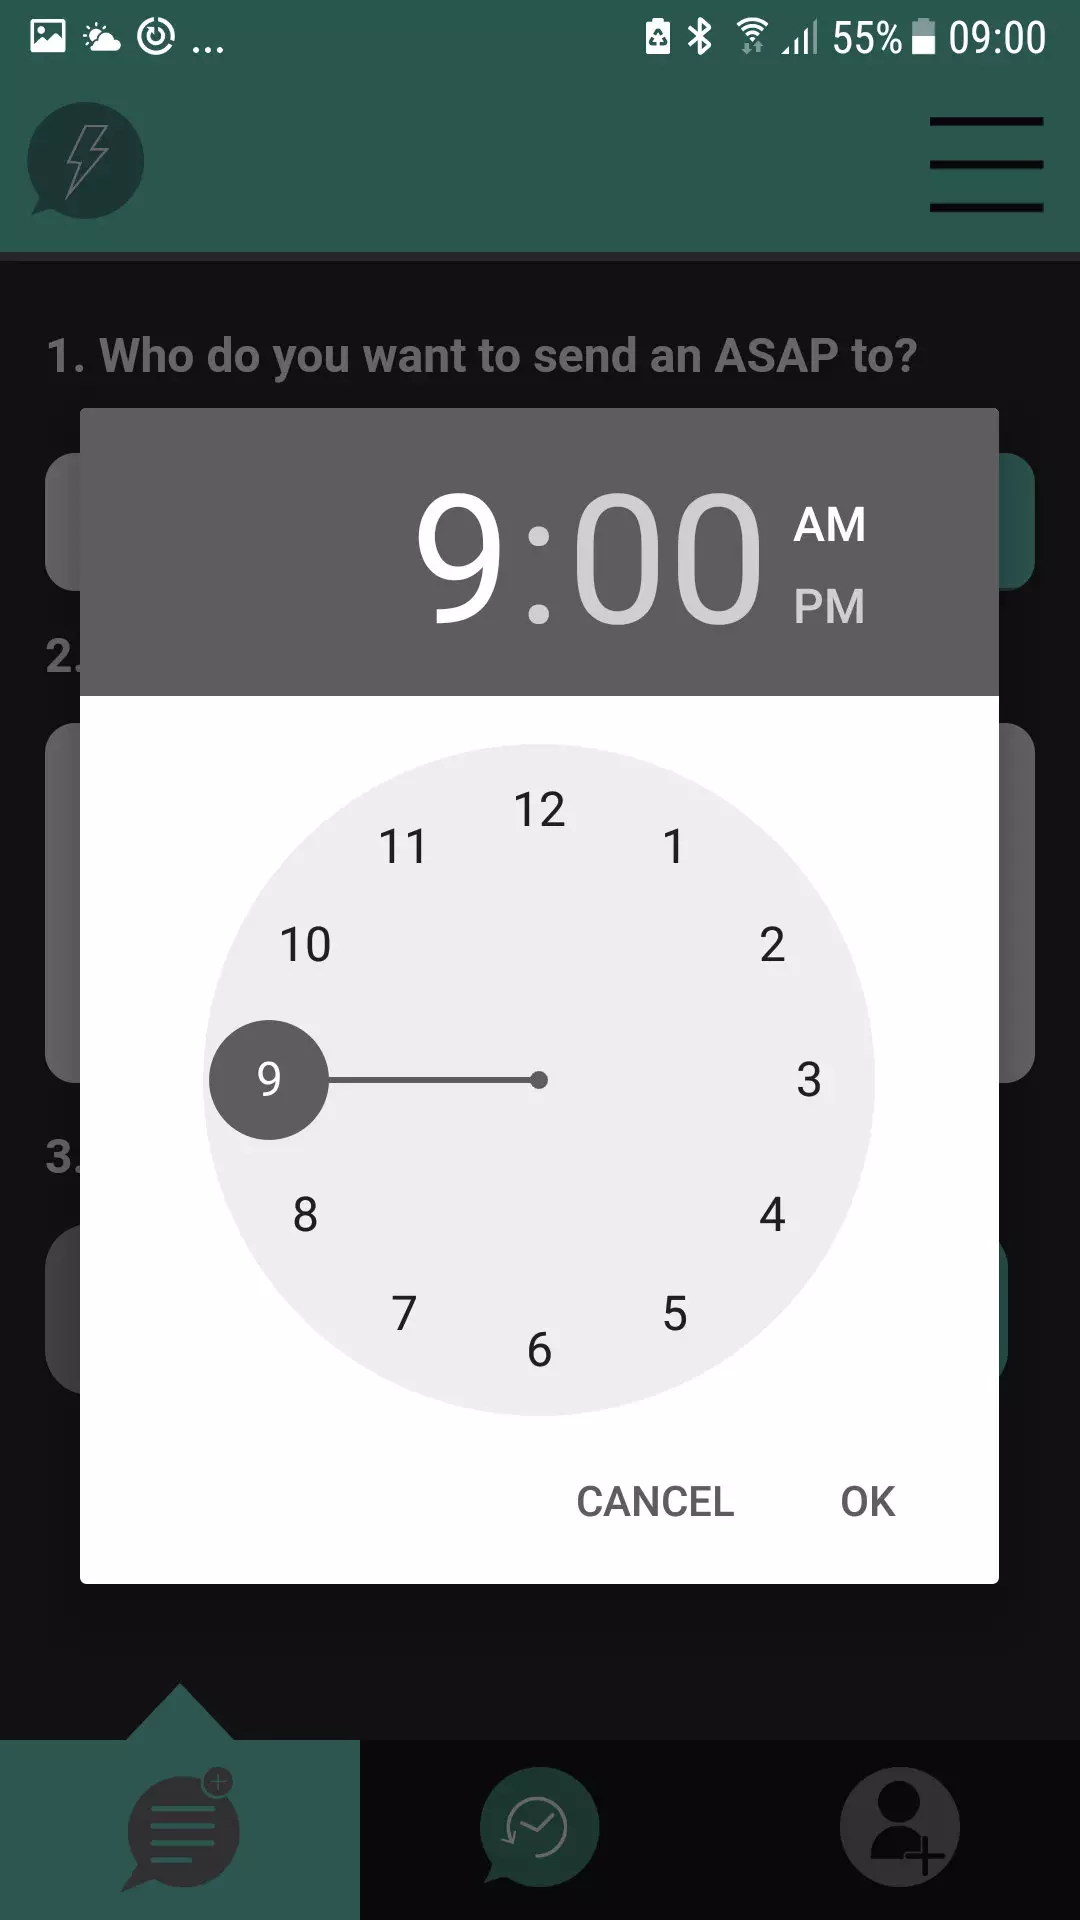 The app freezes the child's phone and sounds an alarm until it is answered.